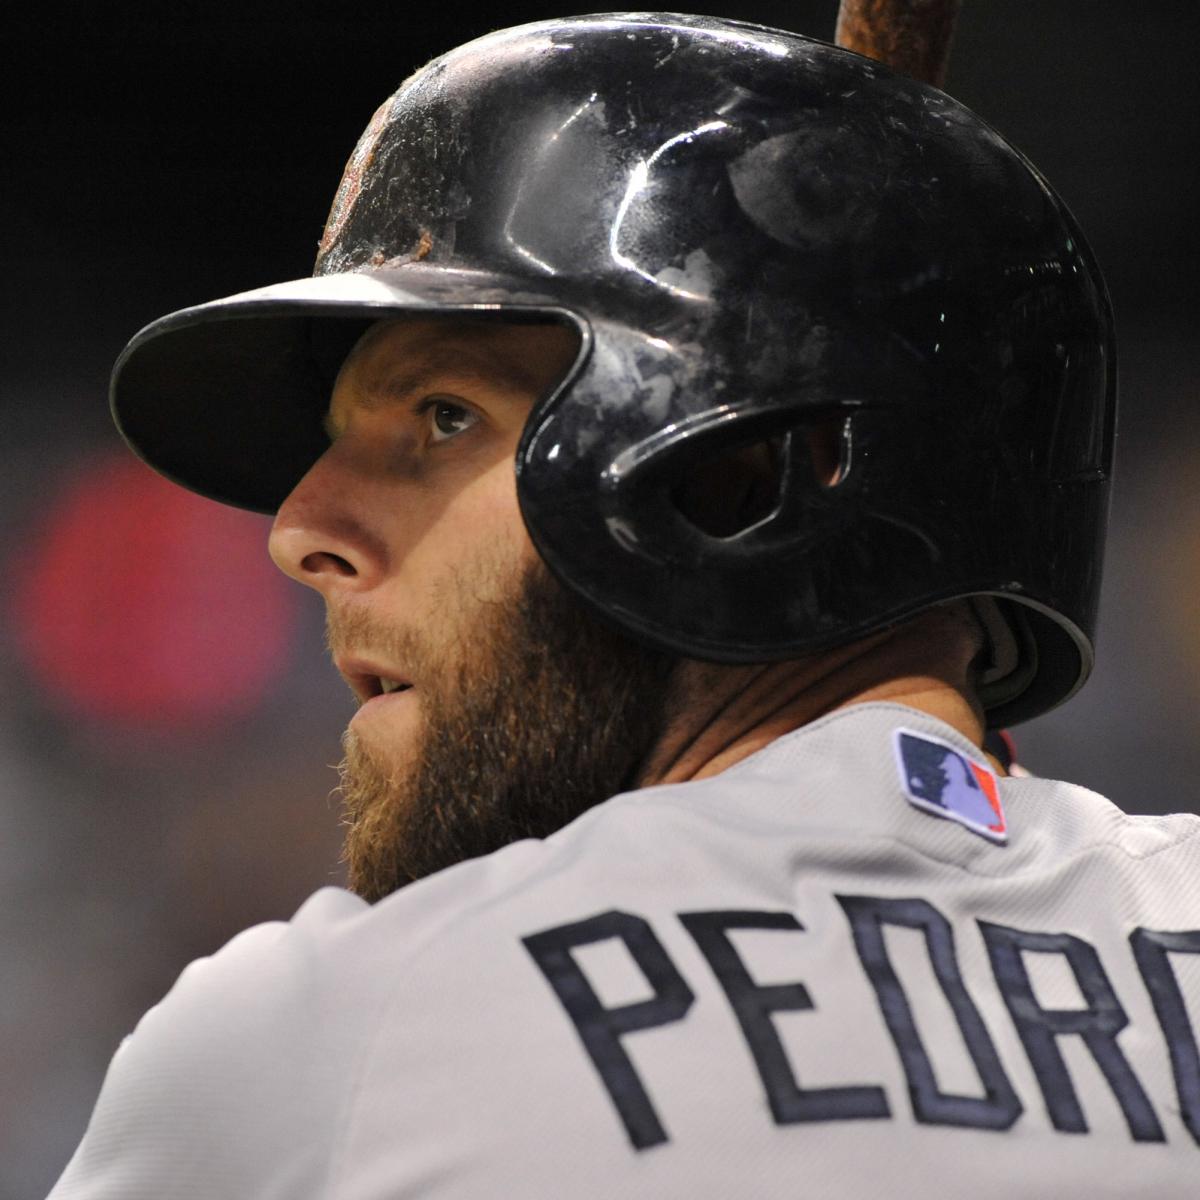 The Ode to Dustin Pedroia. “Couple of years ago, I had 60 at-bats